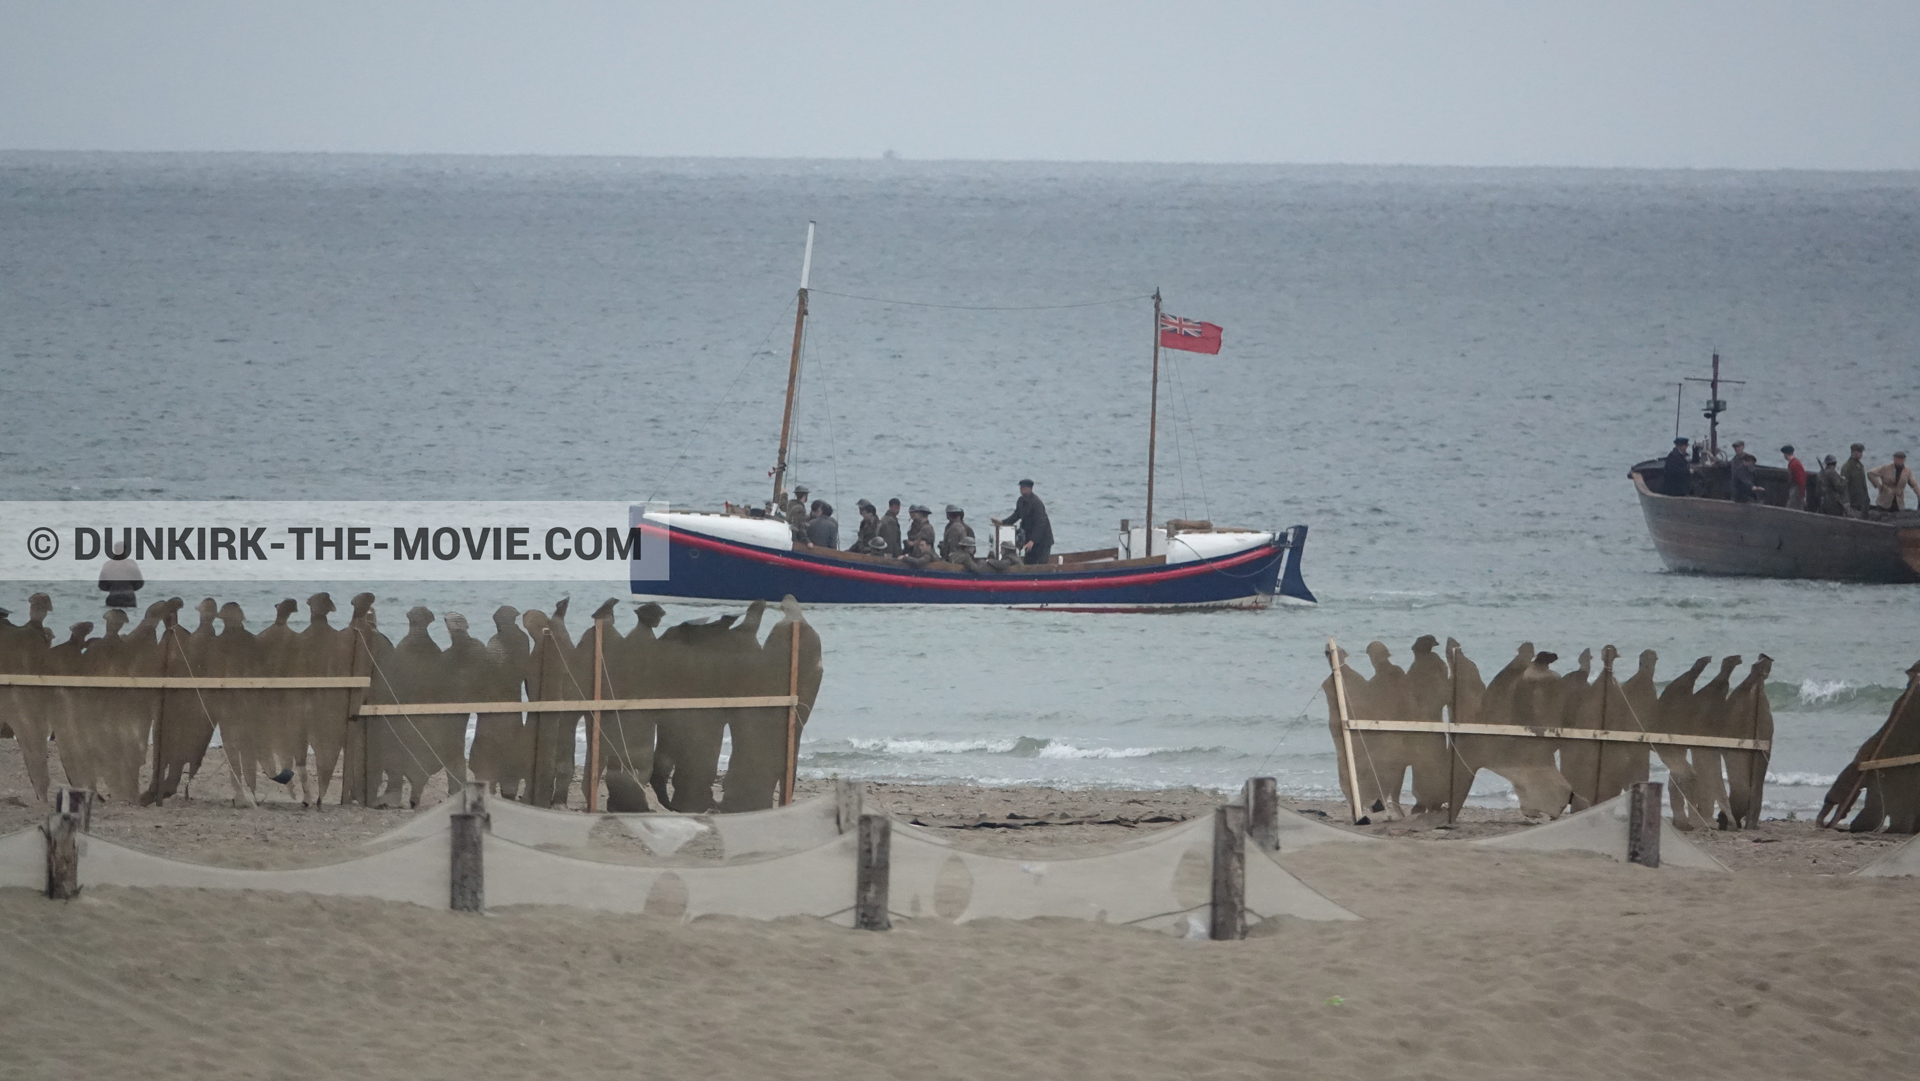 Picture with boat, decor, supernumeraries, beach, Henry Finlay lifeboat,  from behind the scene of the Dunkirk movie by Nolan